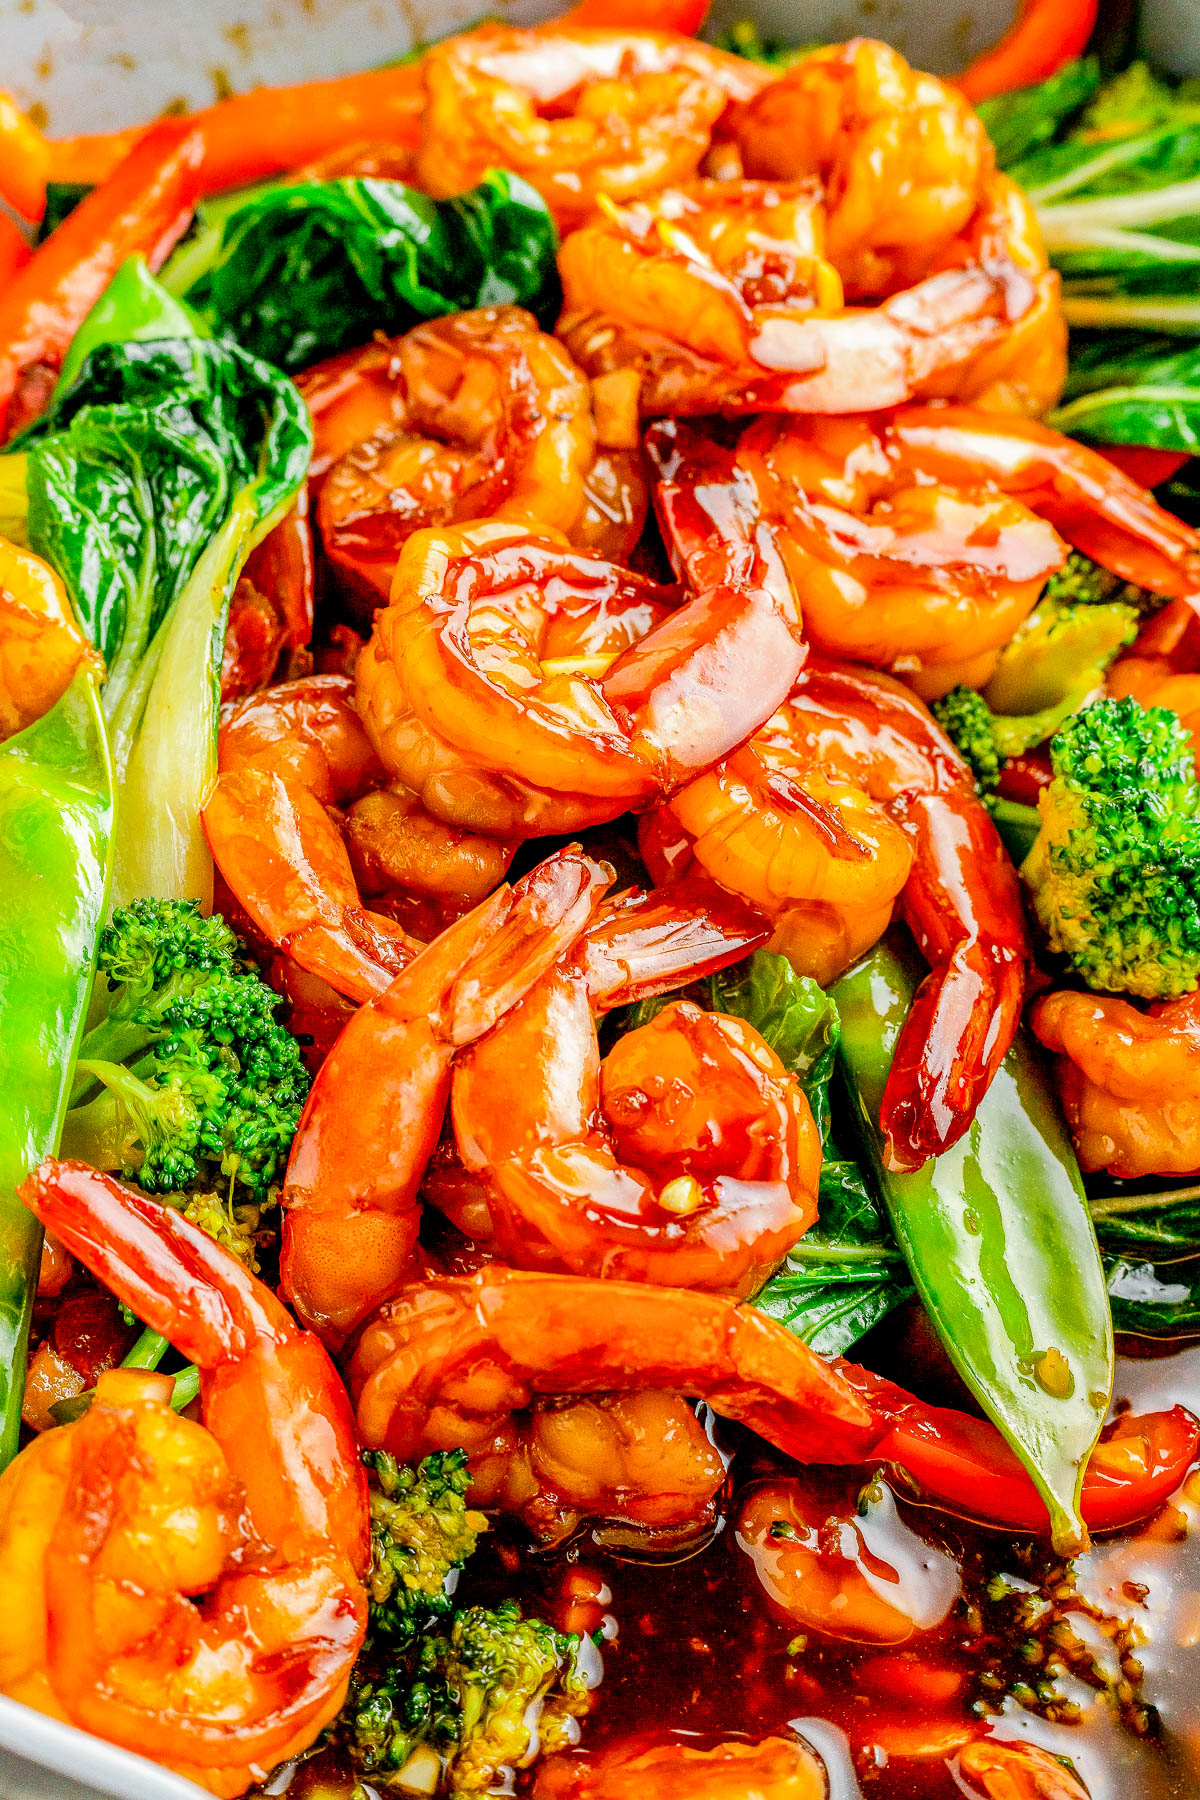 Garlic Shrimp Stir-Fry — Made with juicy shrimp, crisp-tender veggies, and a homemade stir-fry sauce, this stir-fry is QUICK and EASY! It’s ready in just 25 minutes and tastes so much better than takeout! Serve the stir-fry with noodles or rice for a complete meal. 